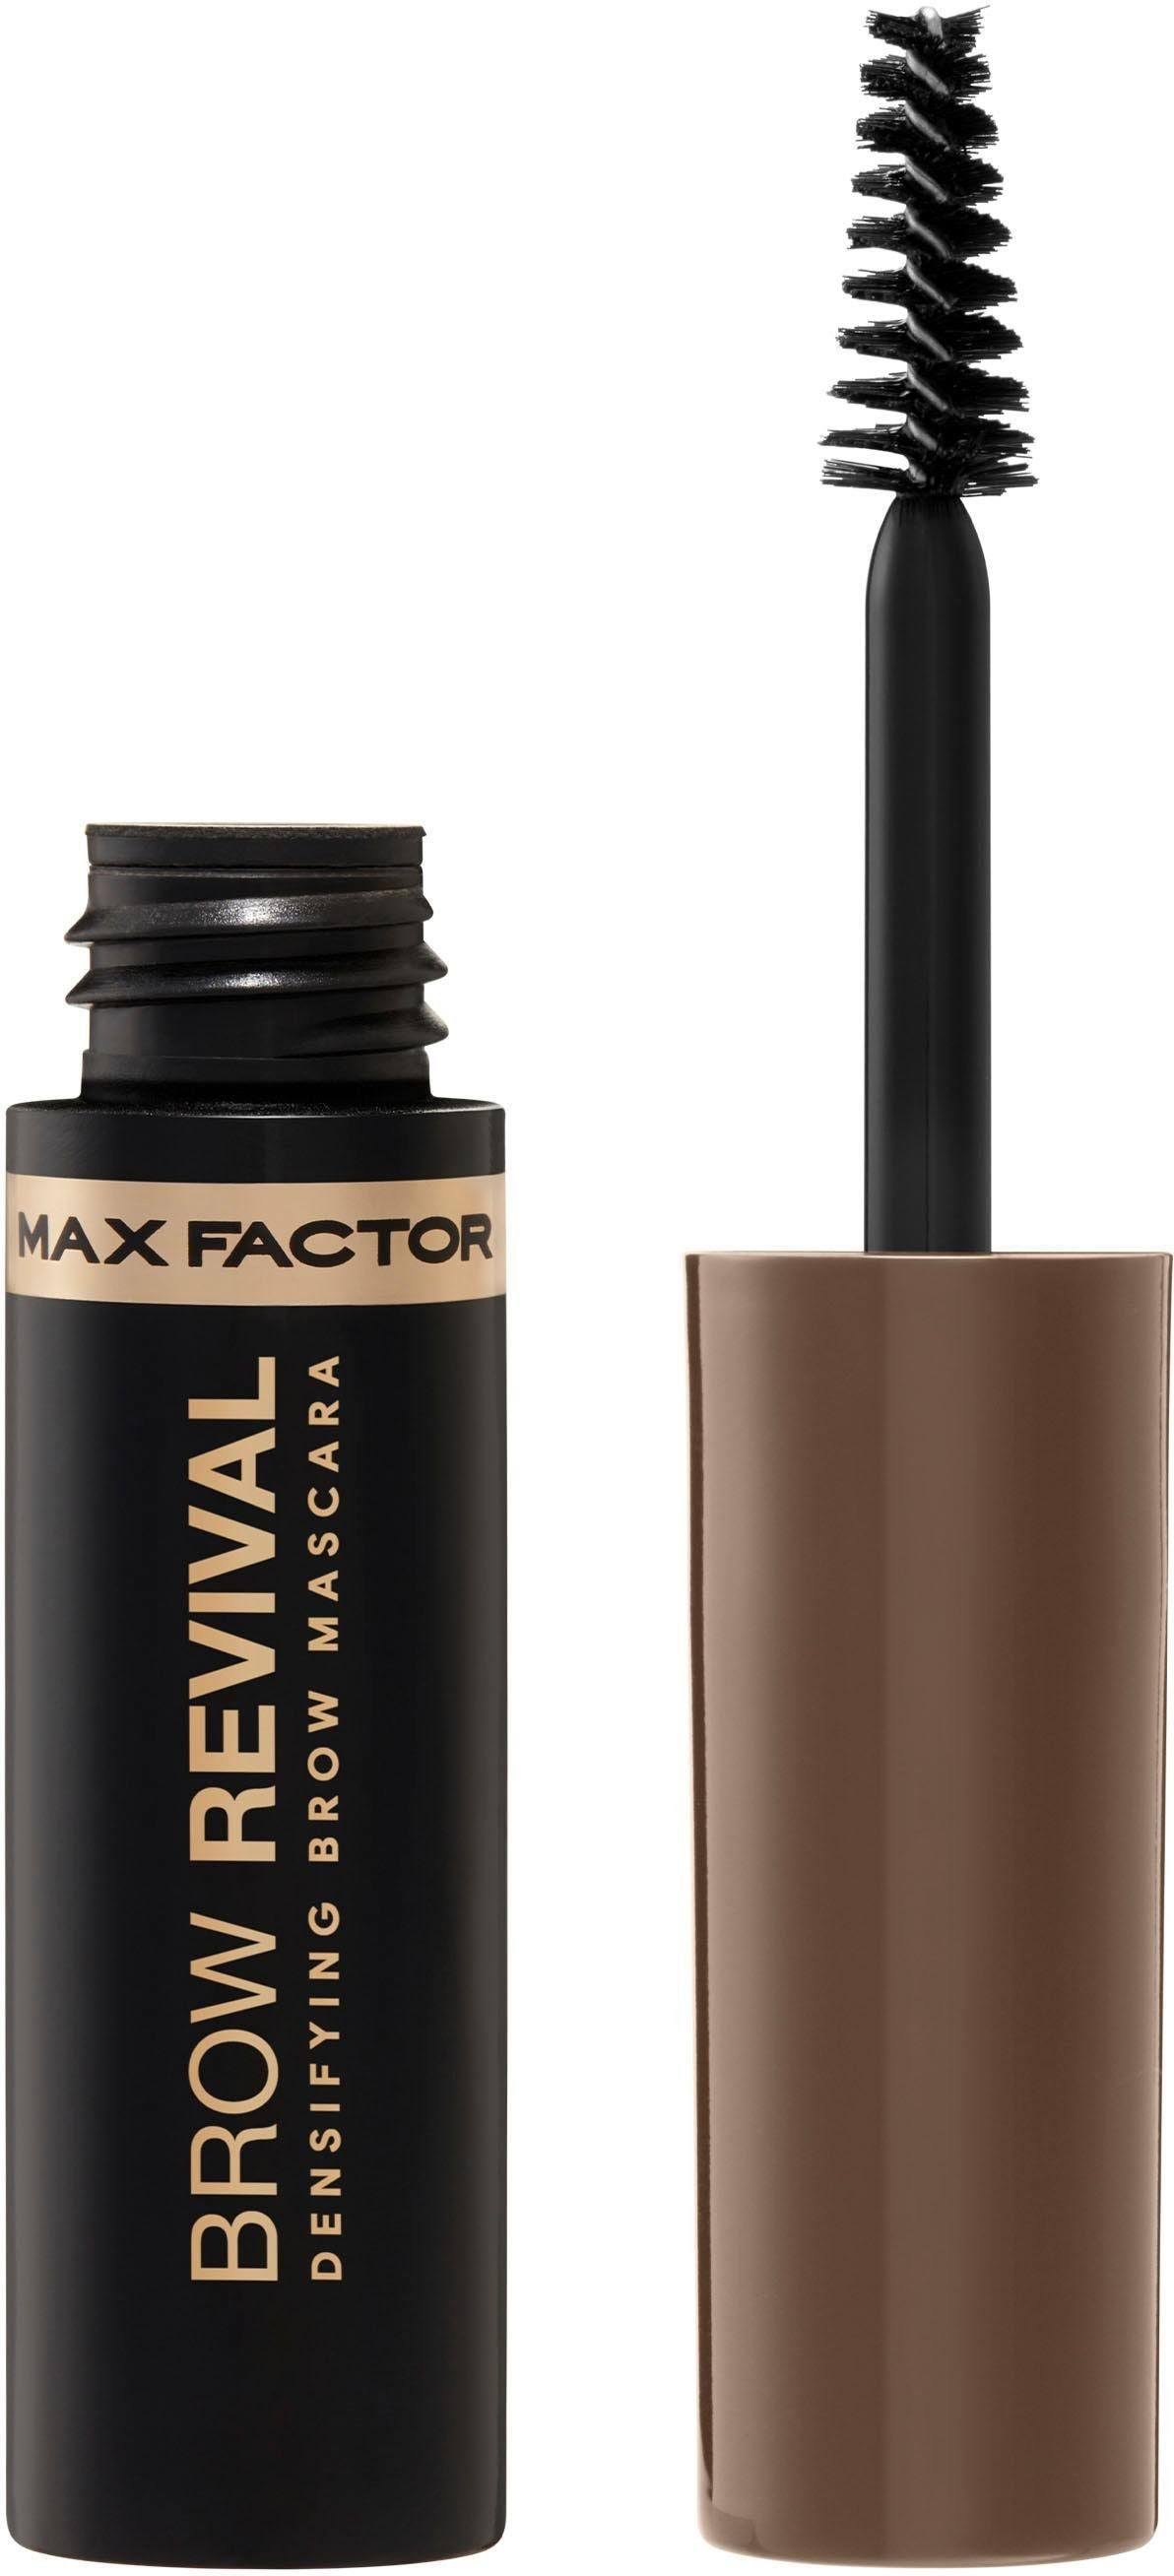 Brow Revival | Max Factor Soft Brown